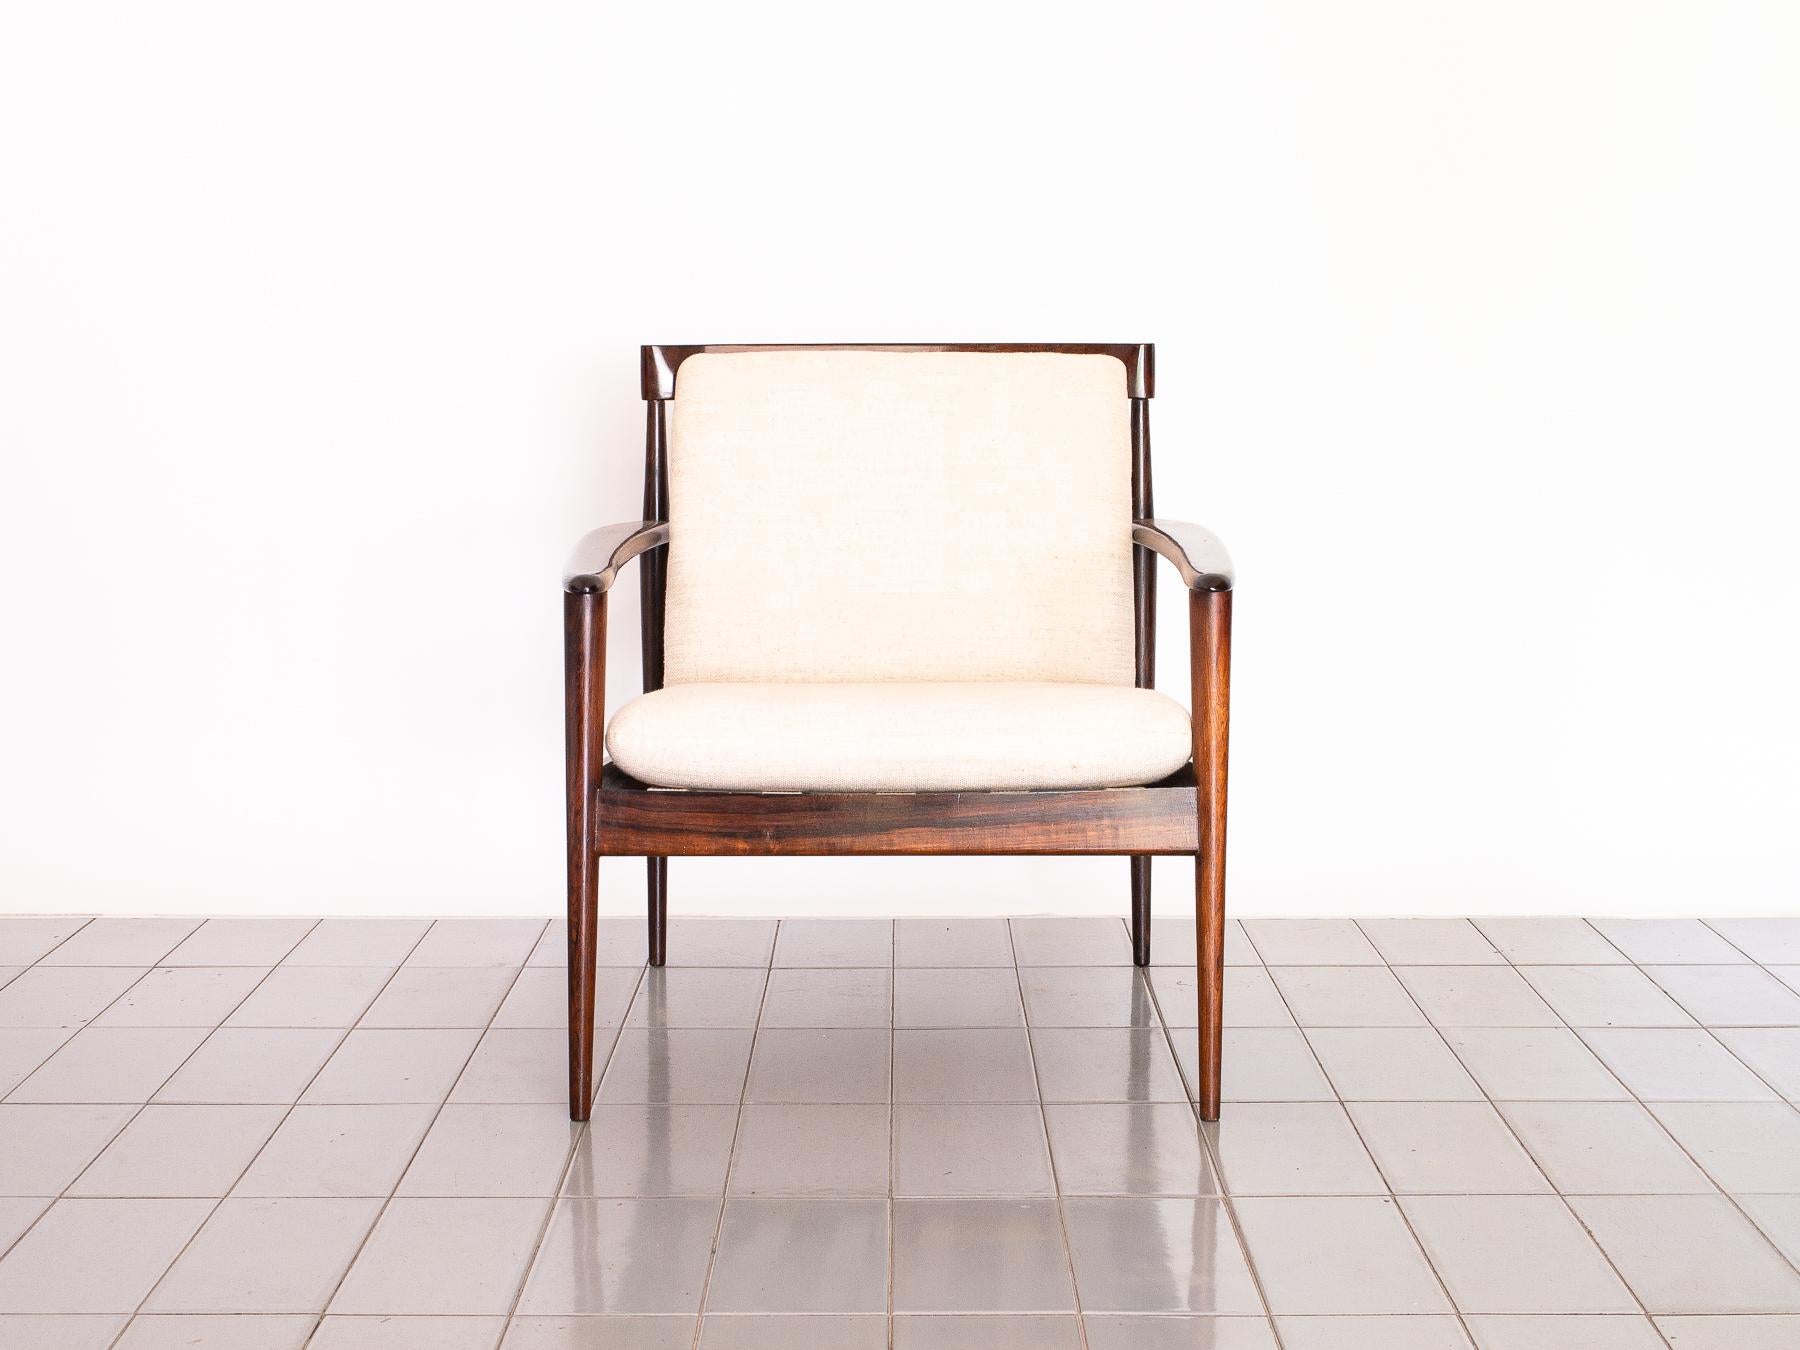 This amazing design was created by Grete Jalk and produced in Brazil by Móveis Ambiente. Cotton straps ensure maximum comfort. Brazilian rosewood ensures beauty and strength. This chair was the most used chair by master Architect Rino Levi